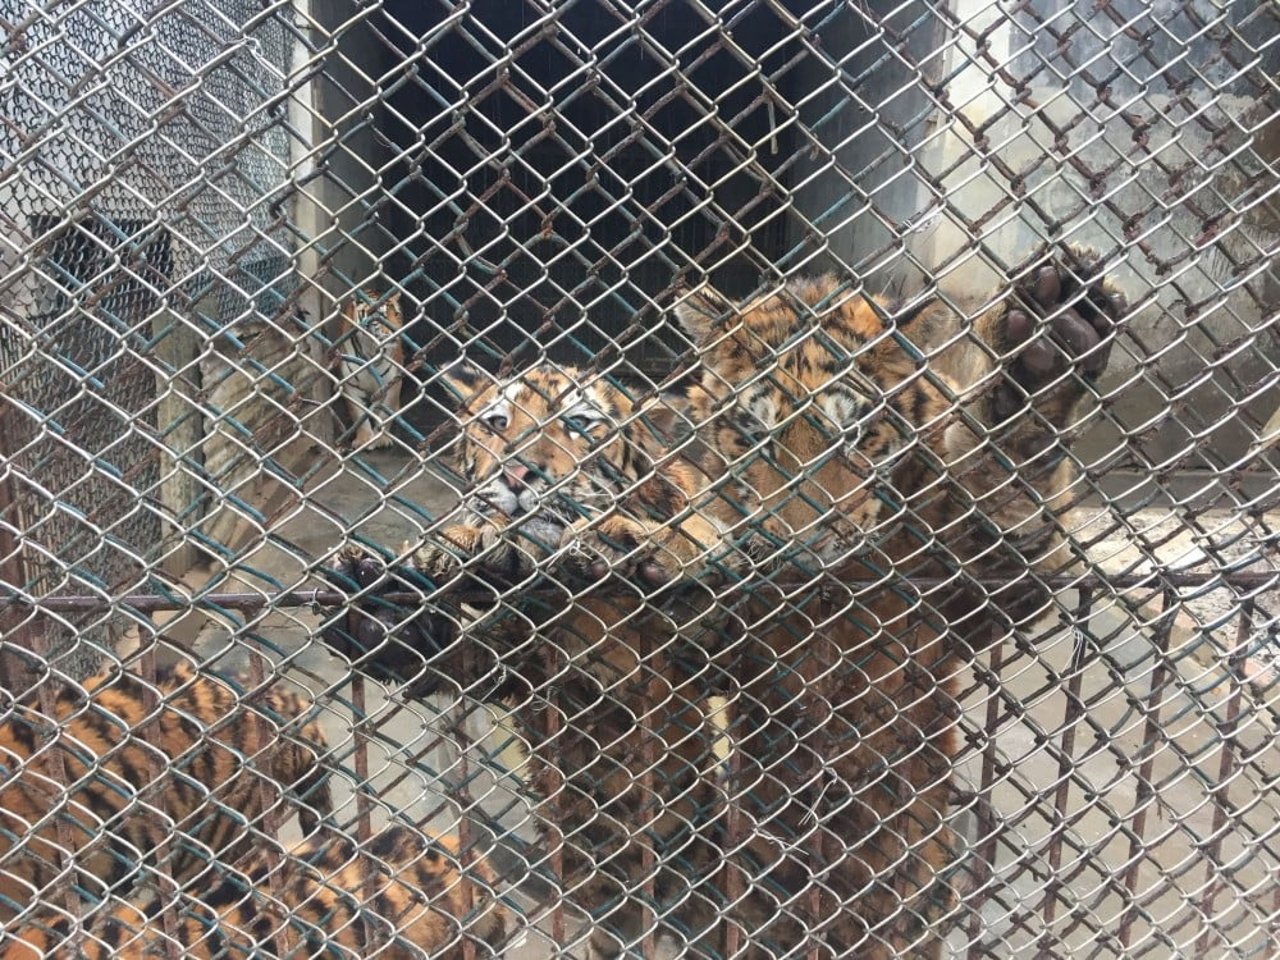 caged_tiger_cubs